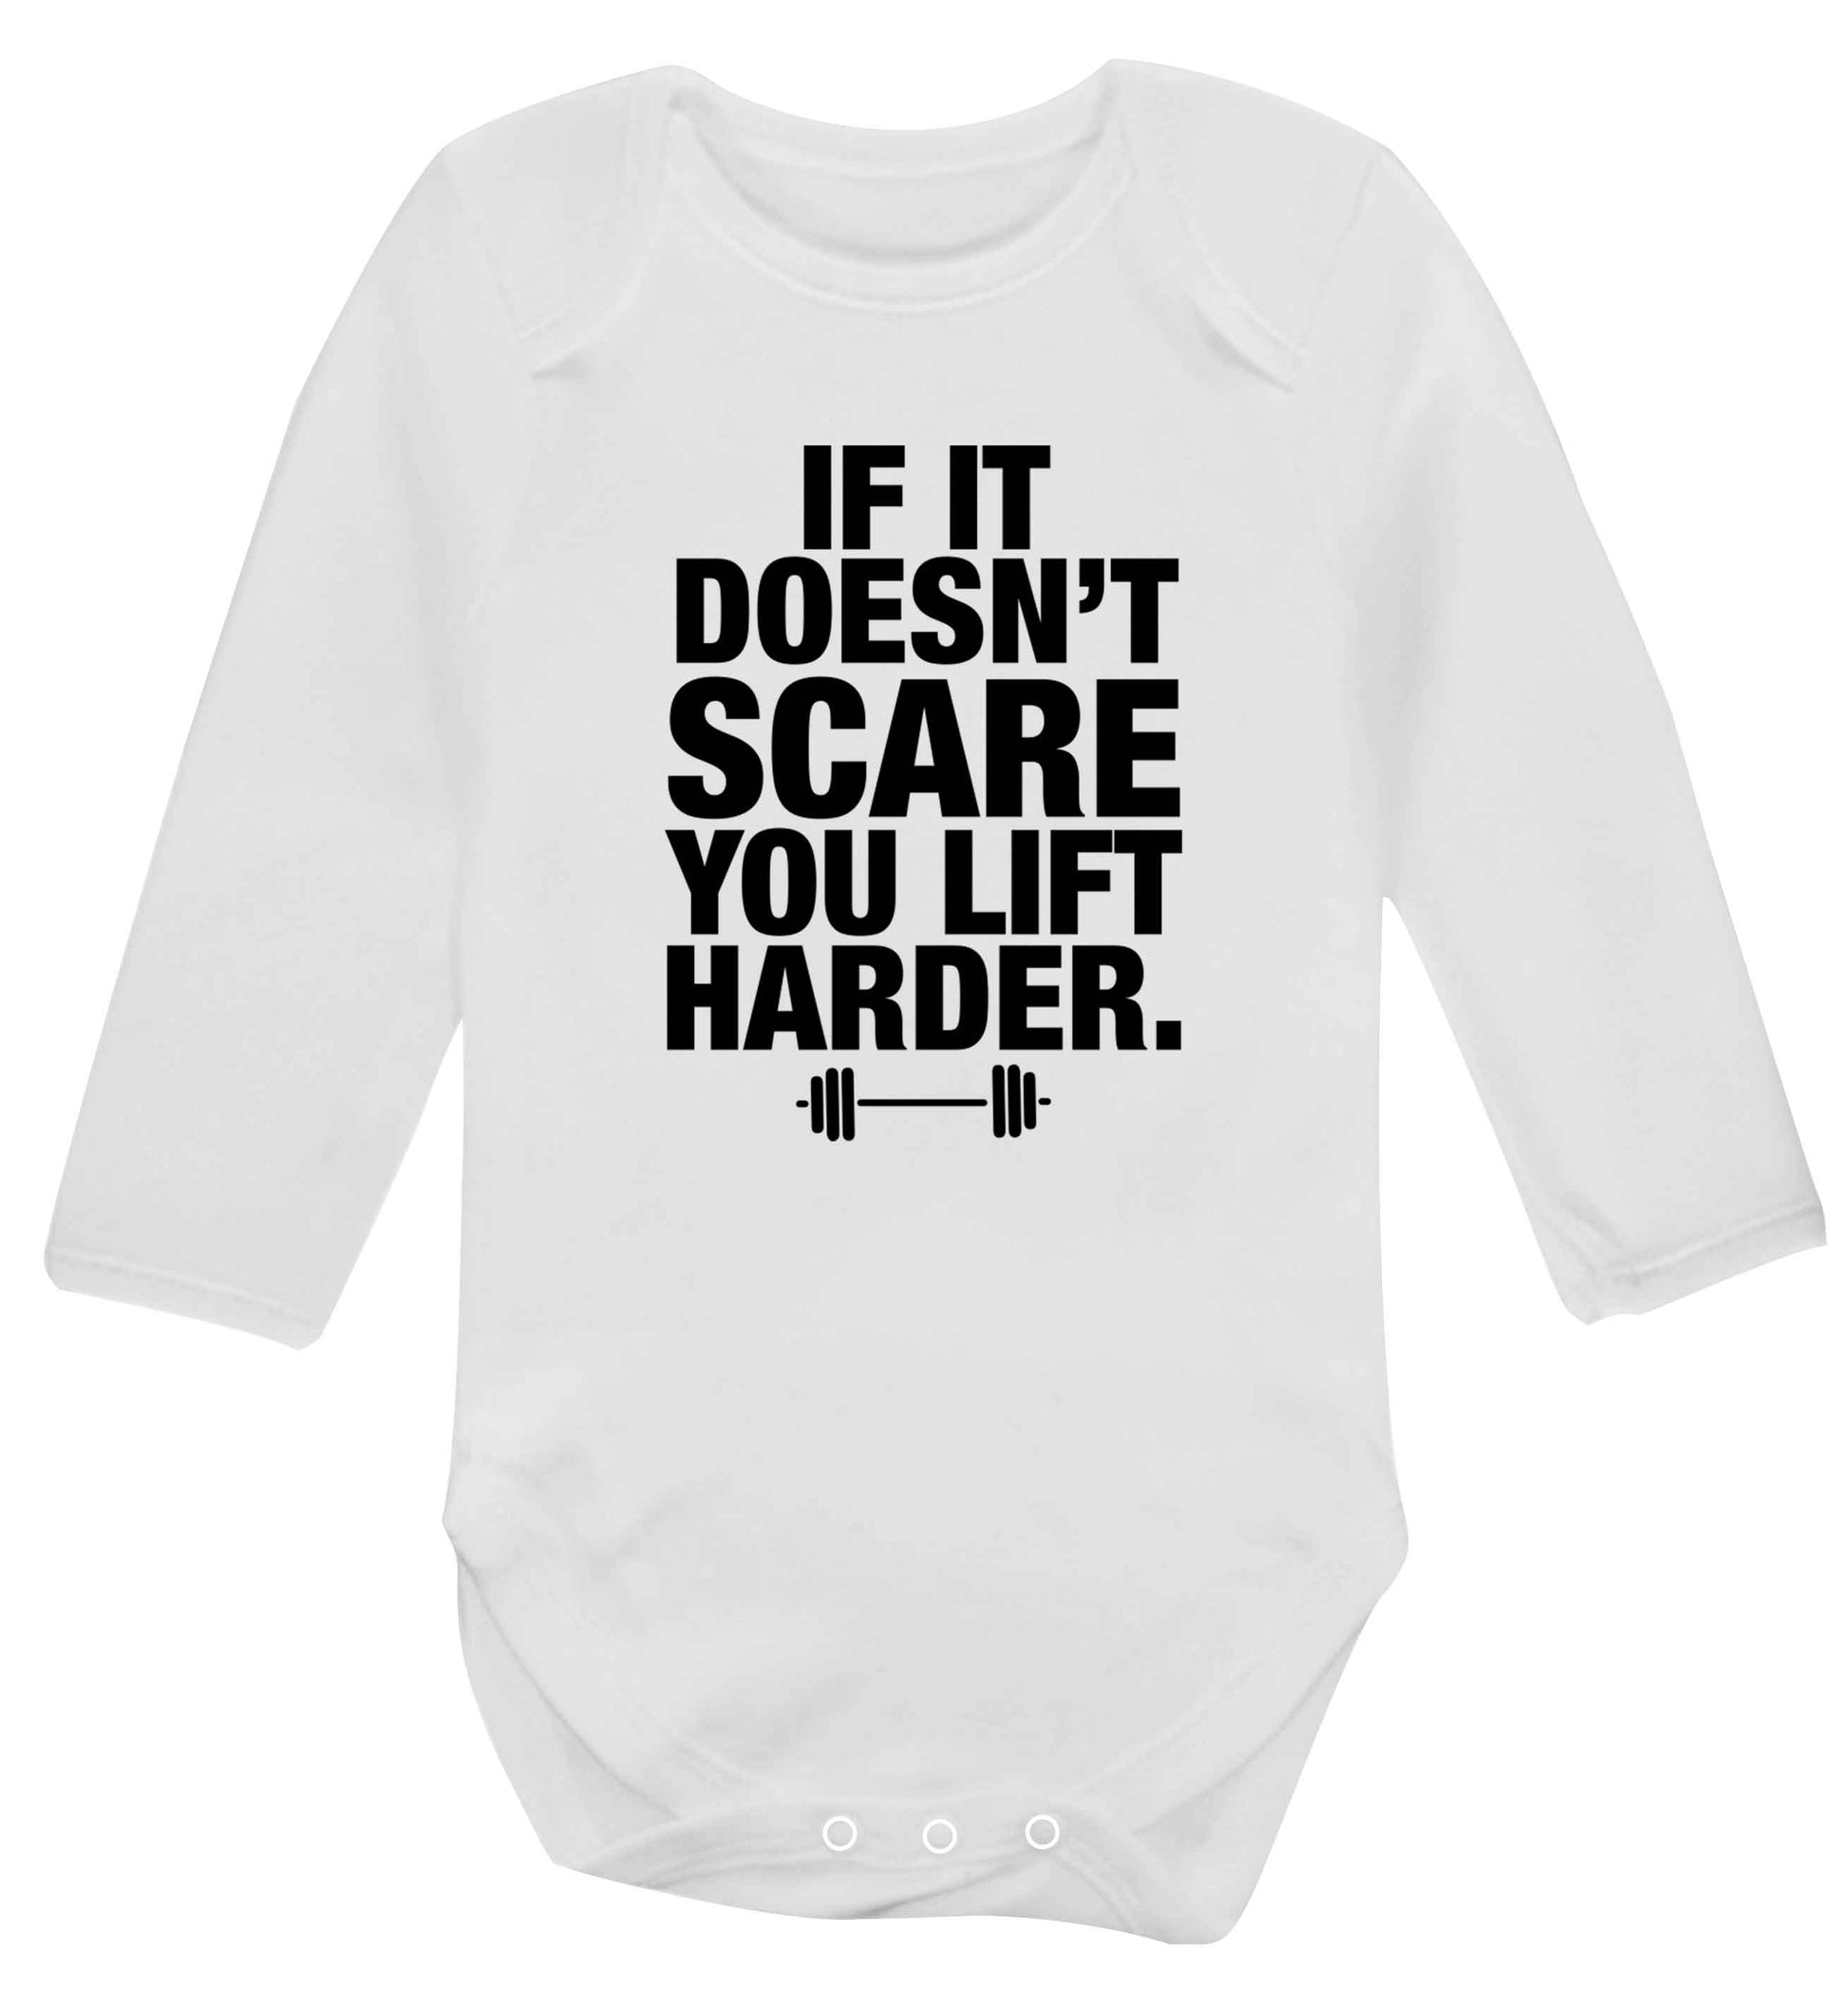 If it doesnt' scare you lift harder Baby Vest long sleeved white 6-12 months